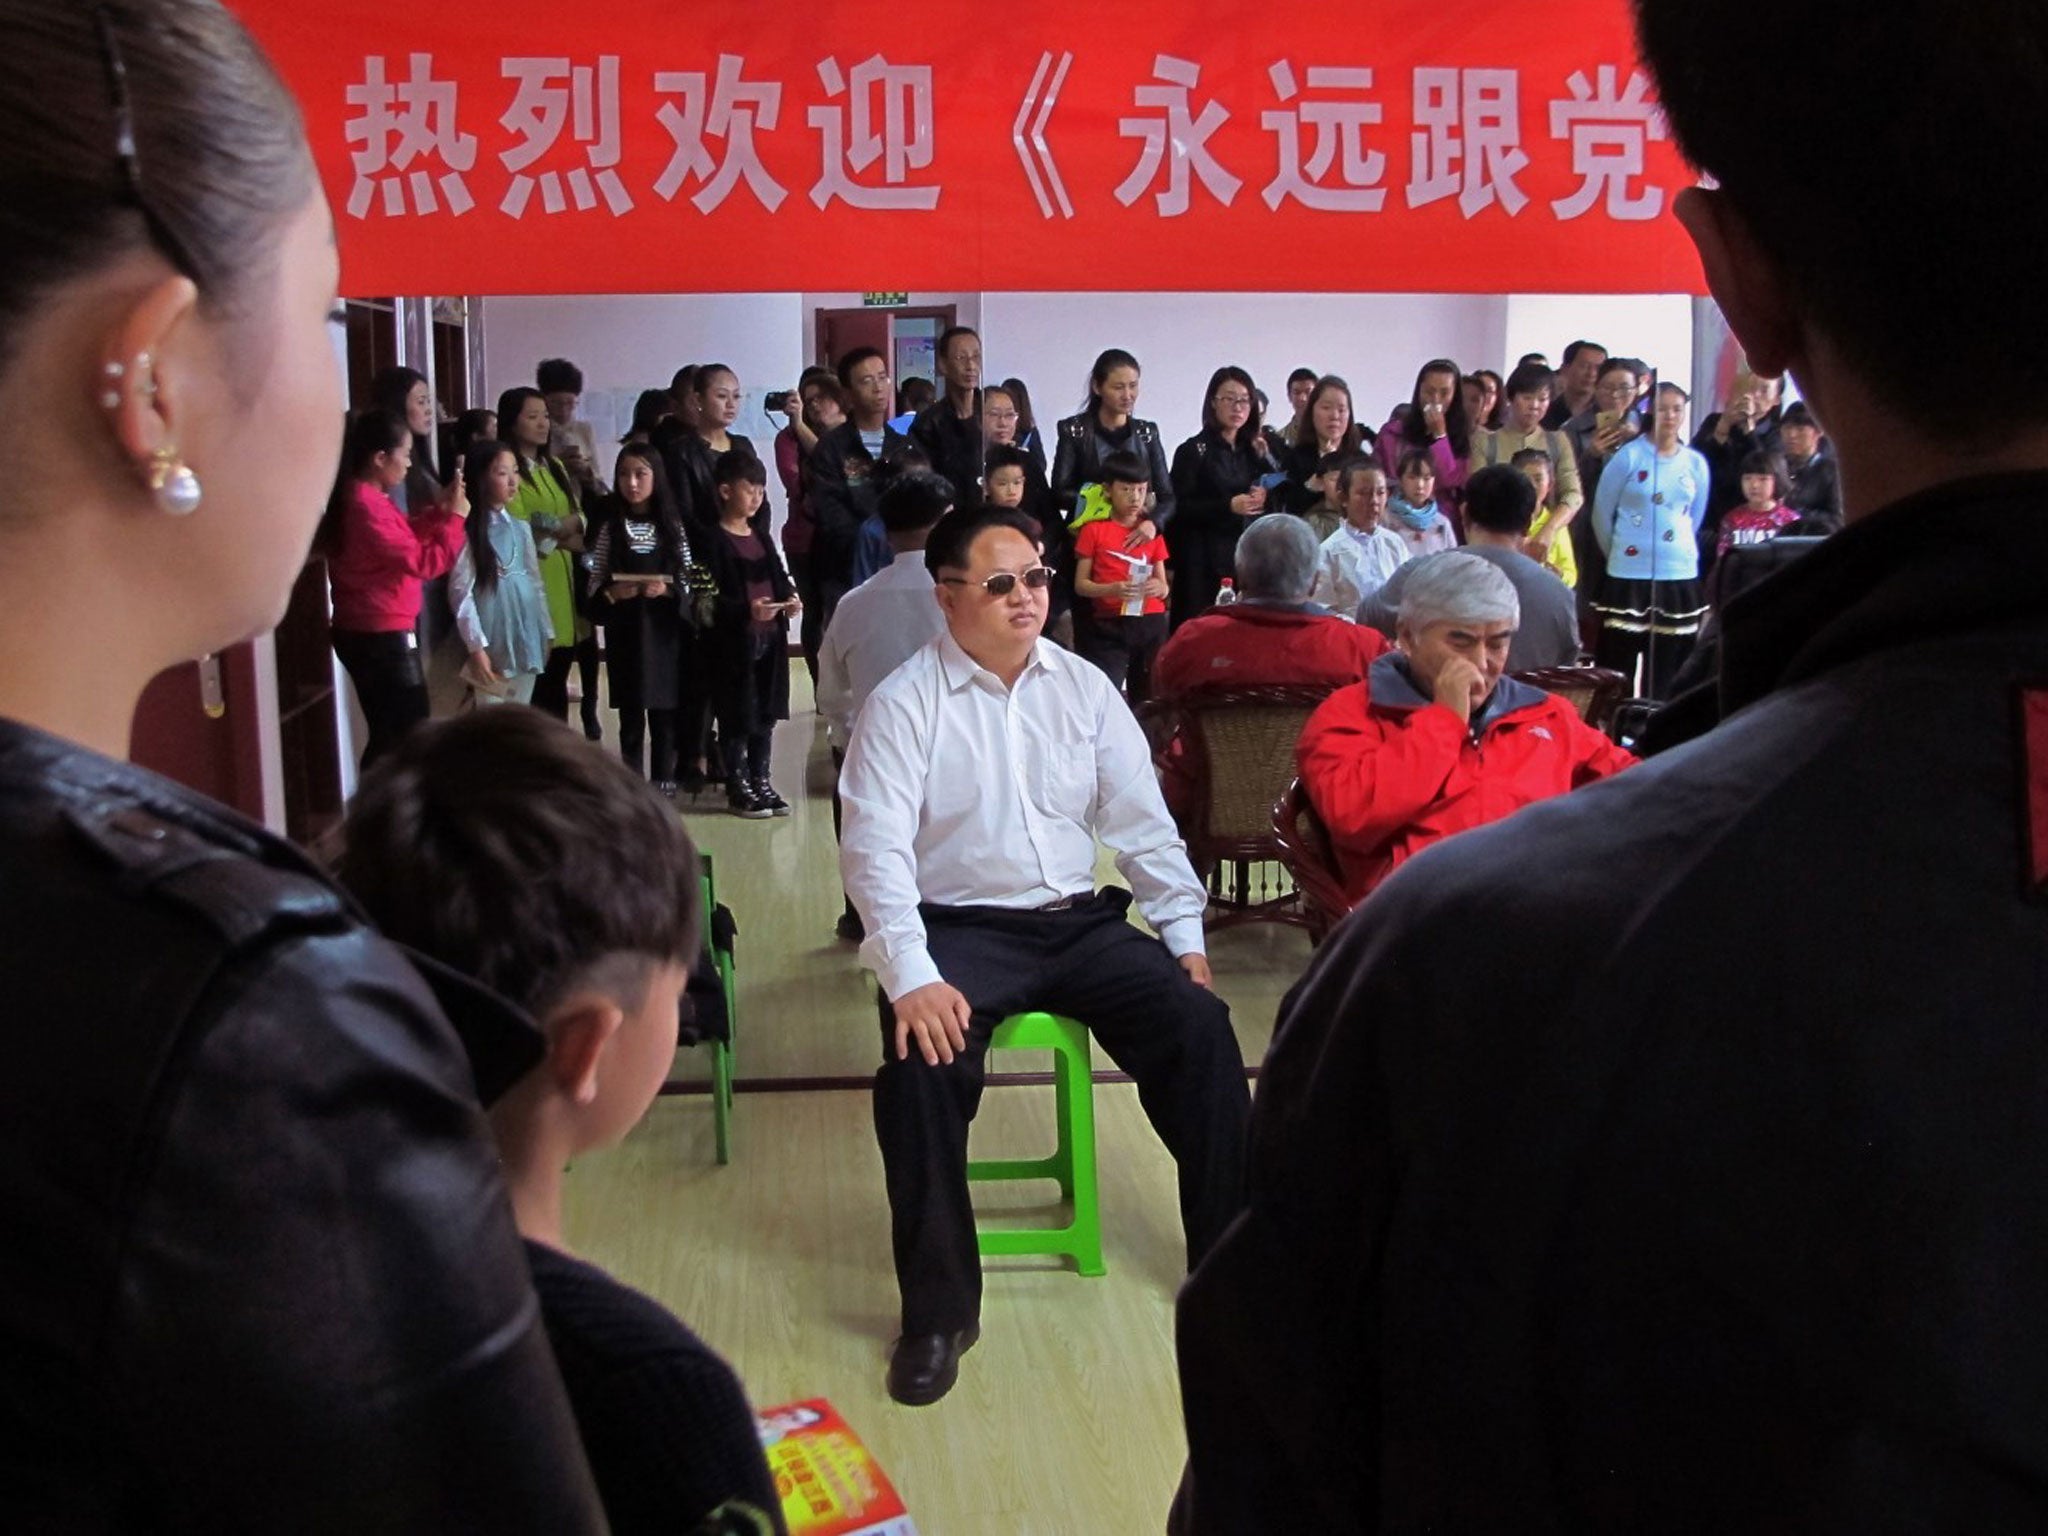 Jia Yongtang, in costume as Kim Jong Un, helps judge a talent show at a dance school in Taiyuan, China, last month